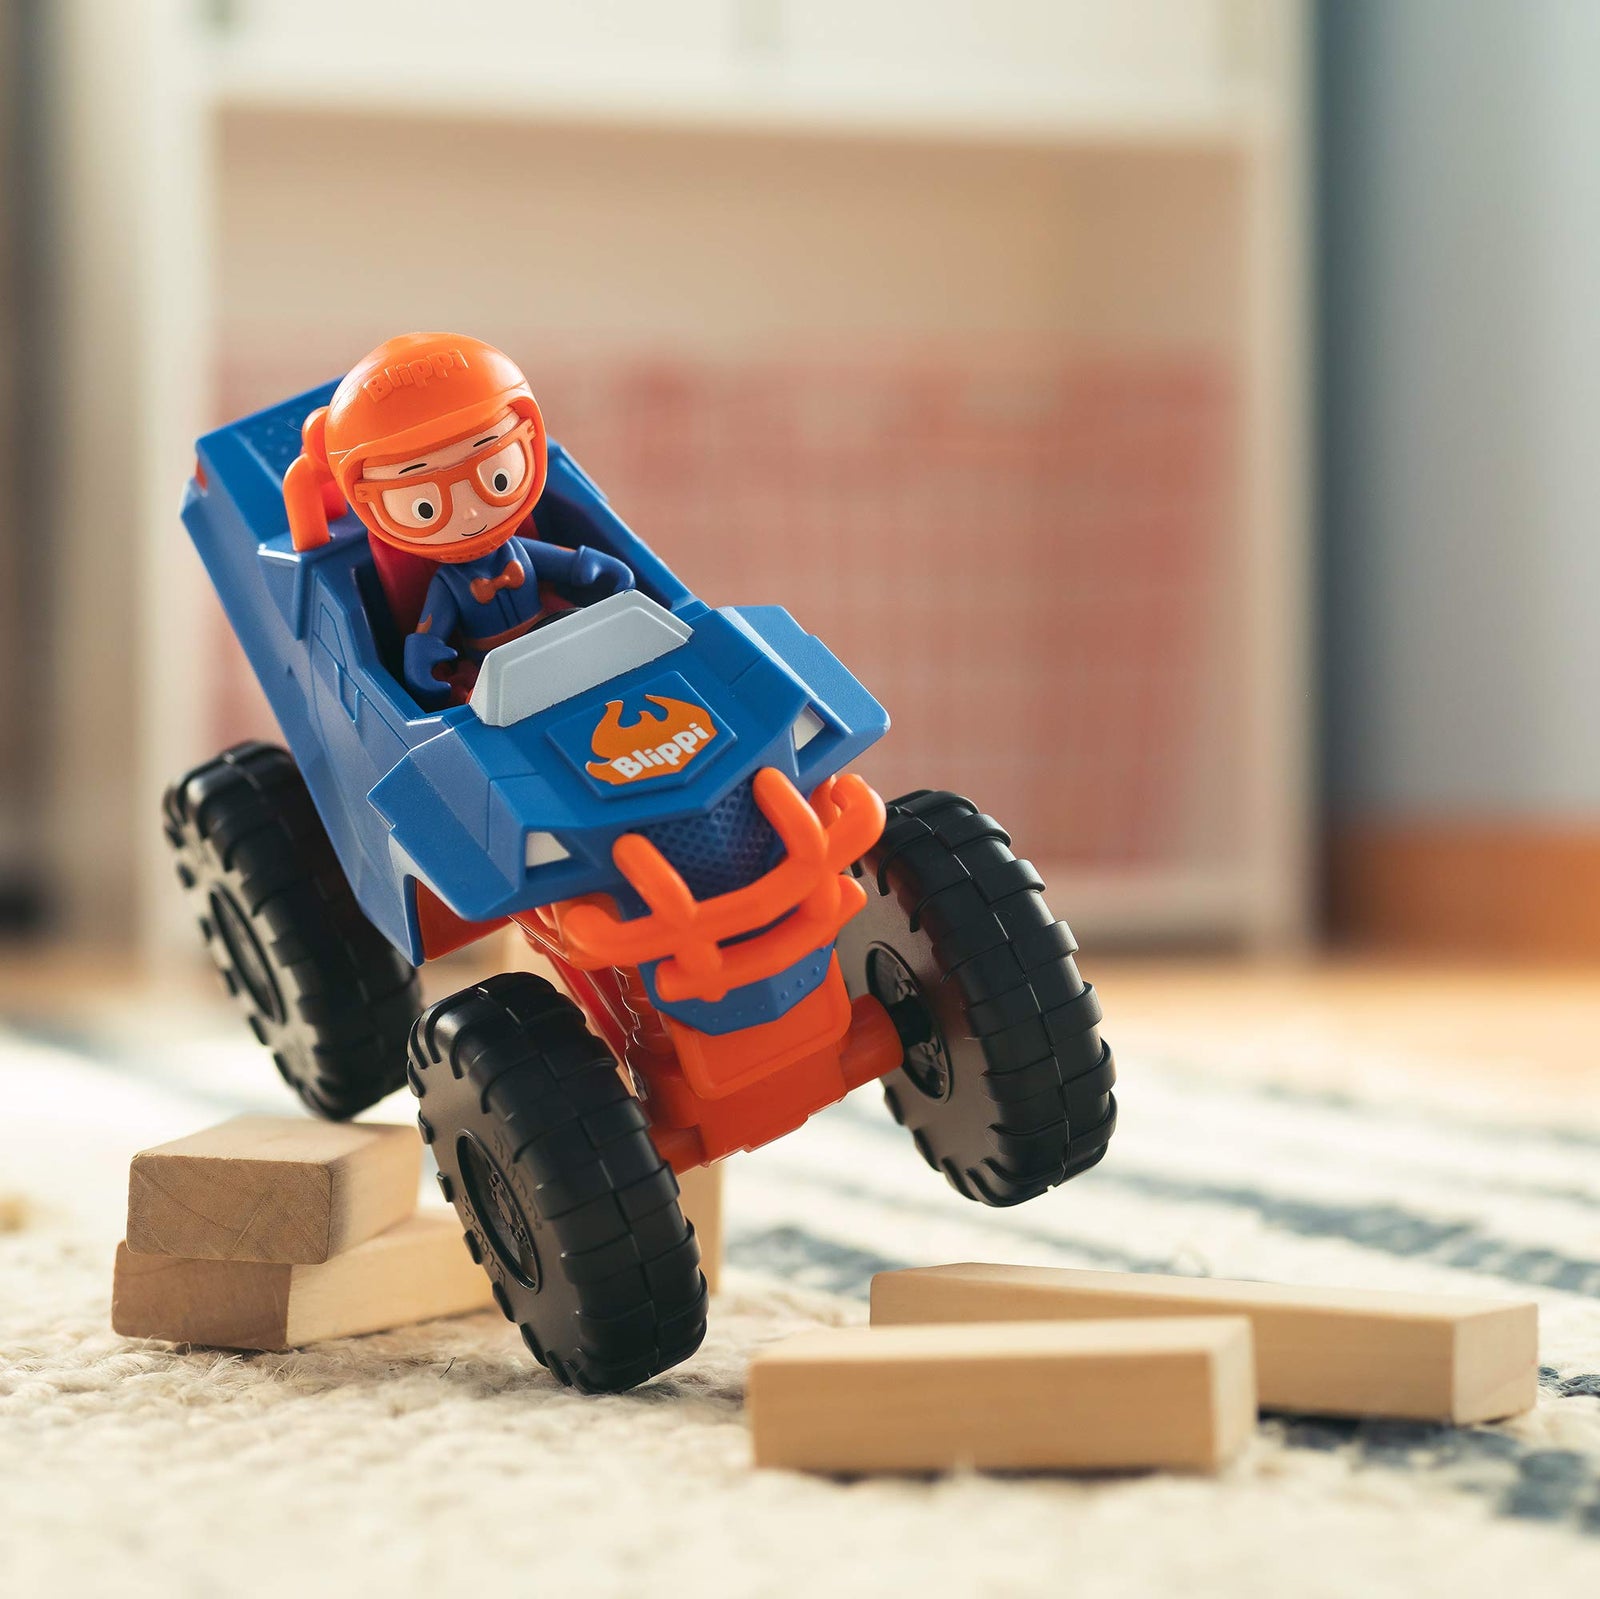 Blippi Monster Truck Mobile - Mini Vehicle with Freewheeling Features Including 2” Character Toy Figure and Cool Hydraulics - Imaginative Play for Toddlers and Young Children